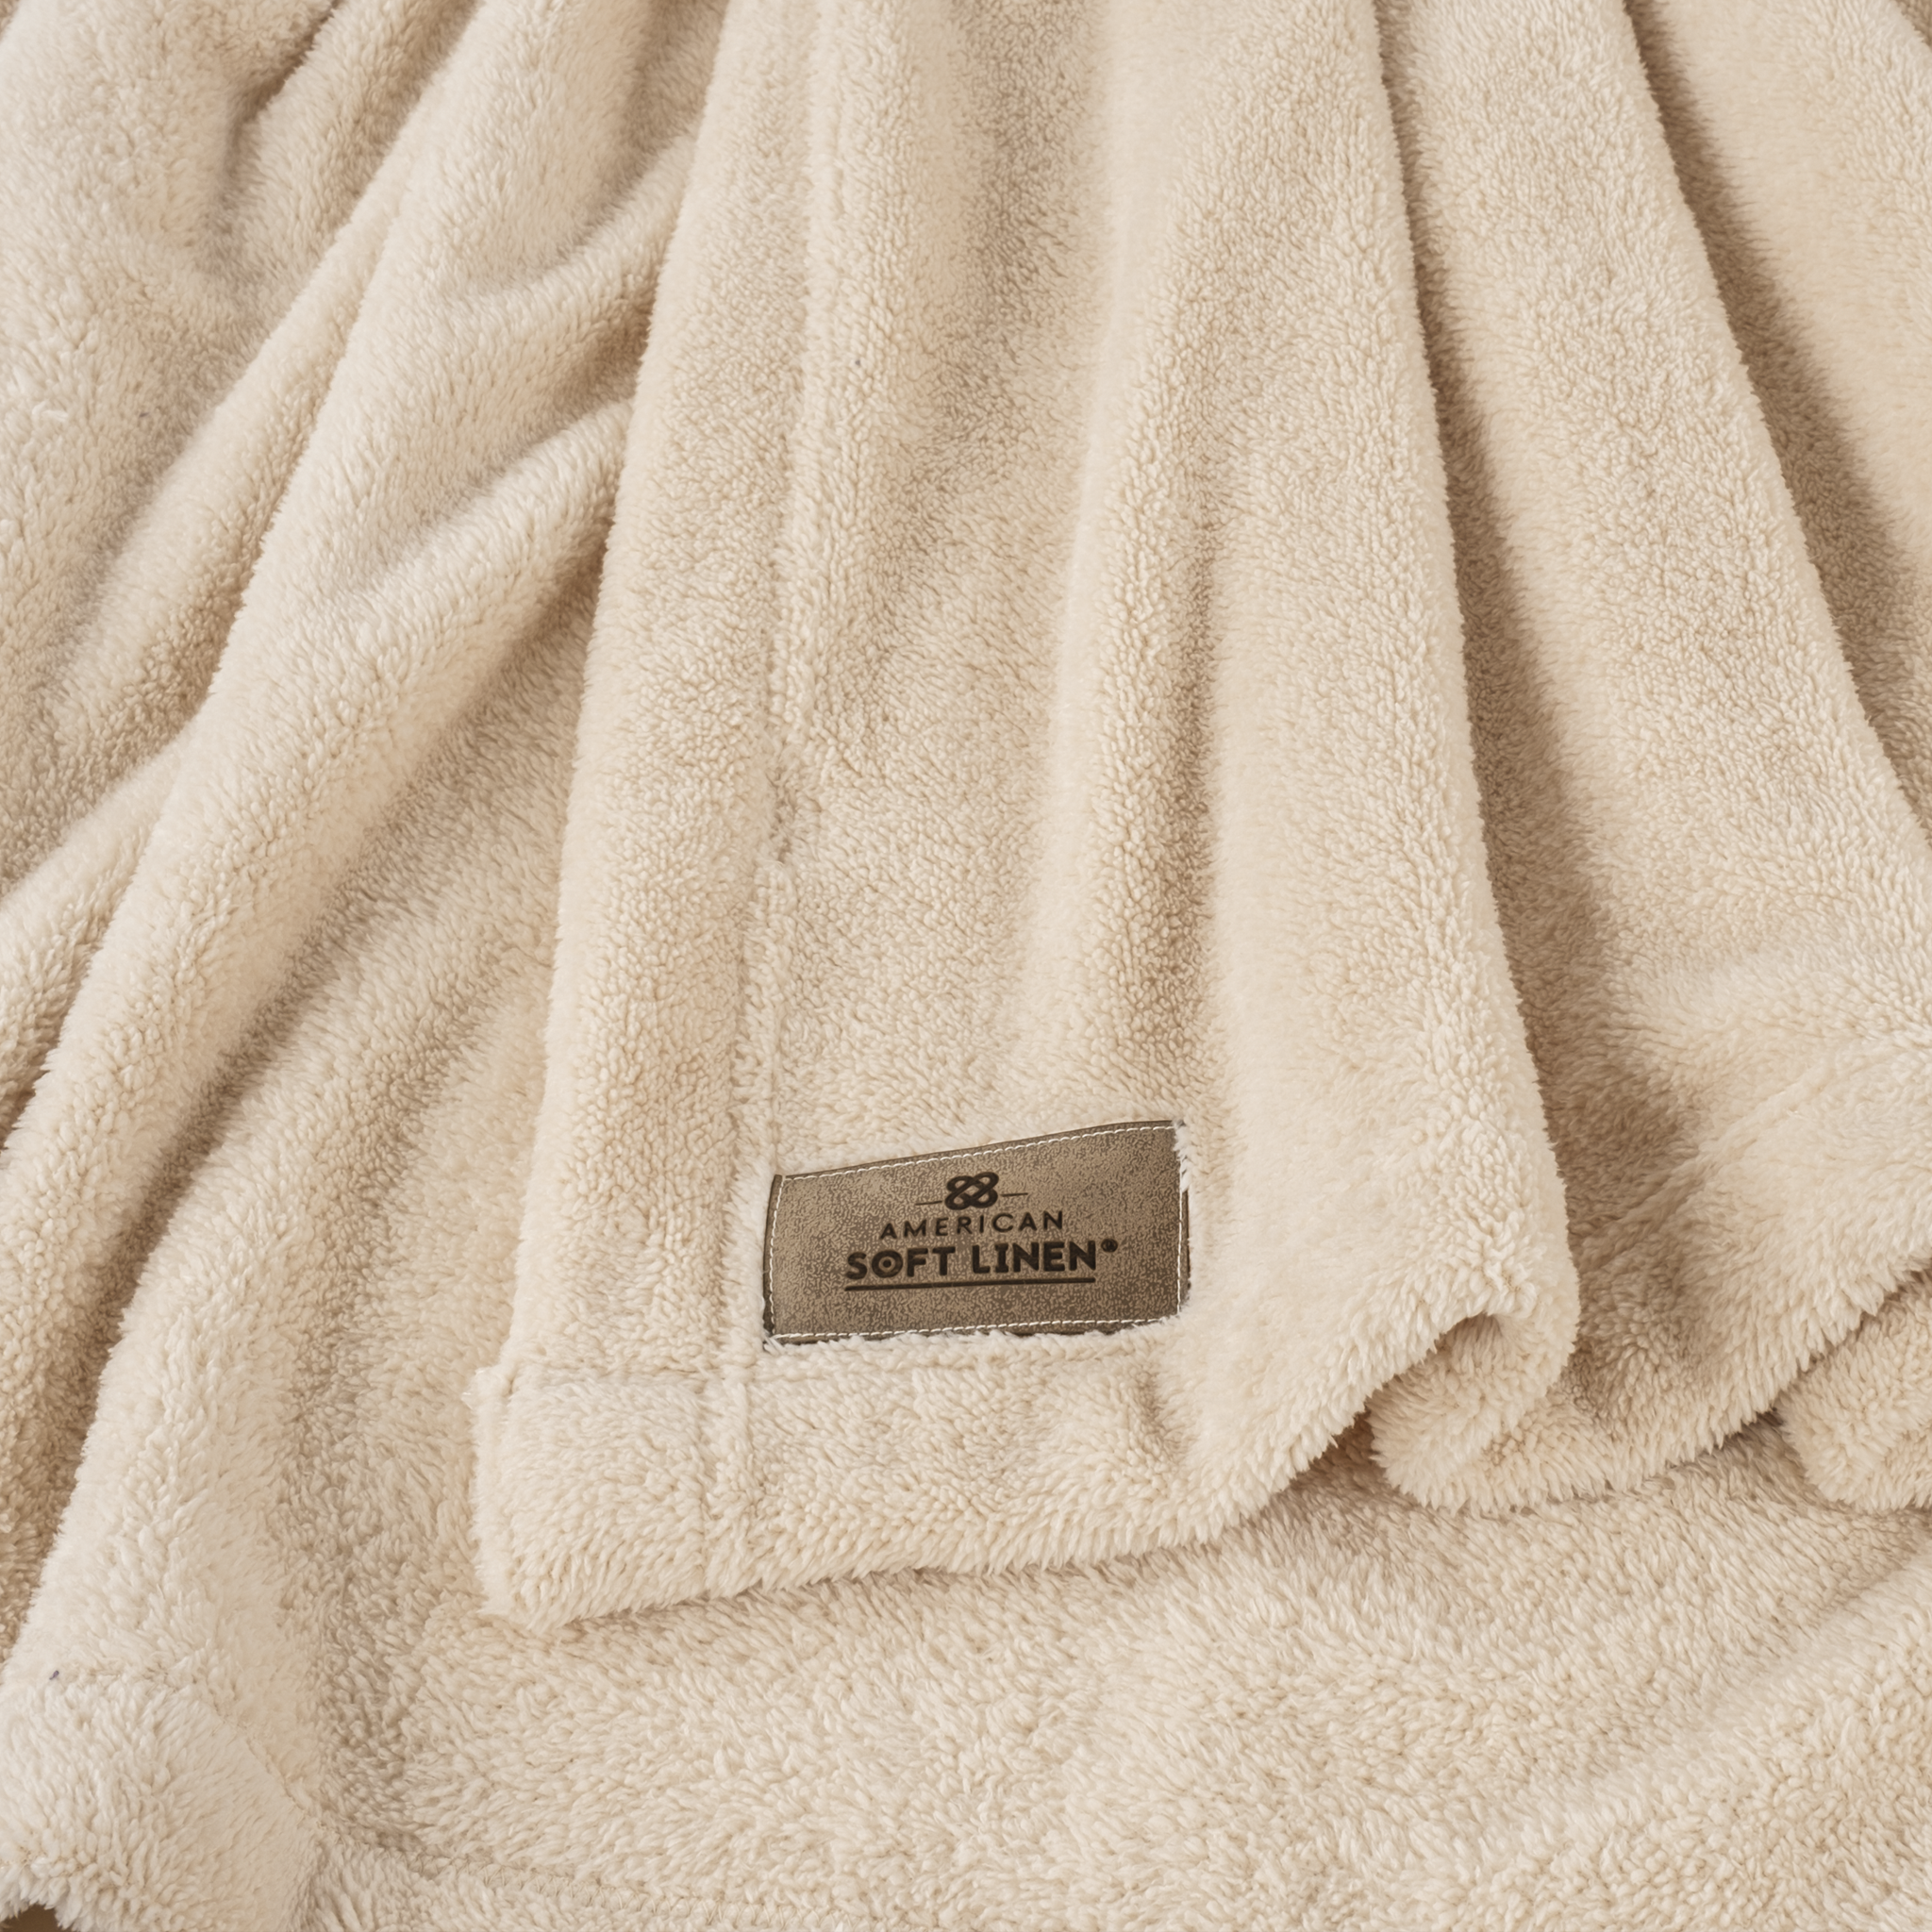 American Soft Linen - Bedding Fleece Blanket - Twin Size 60x80 inches - Sand-Taupe - 4